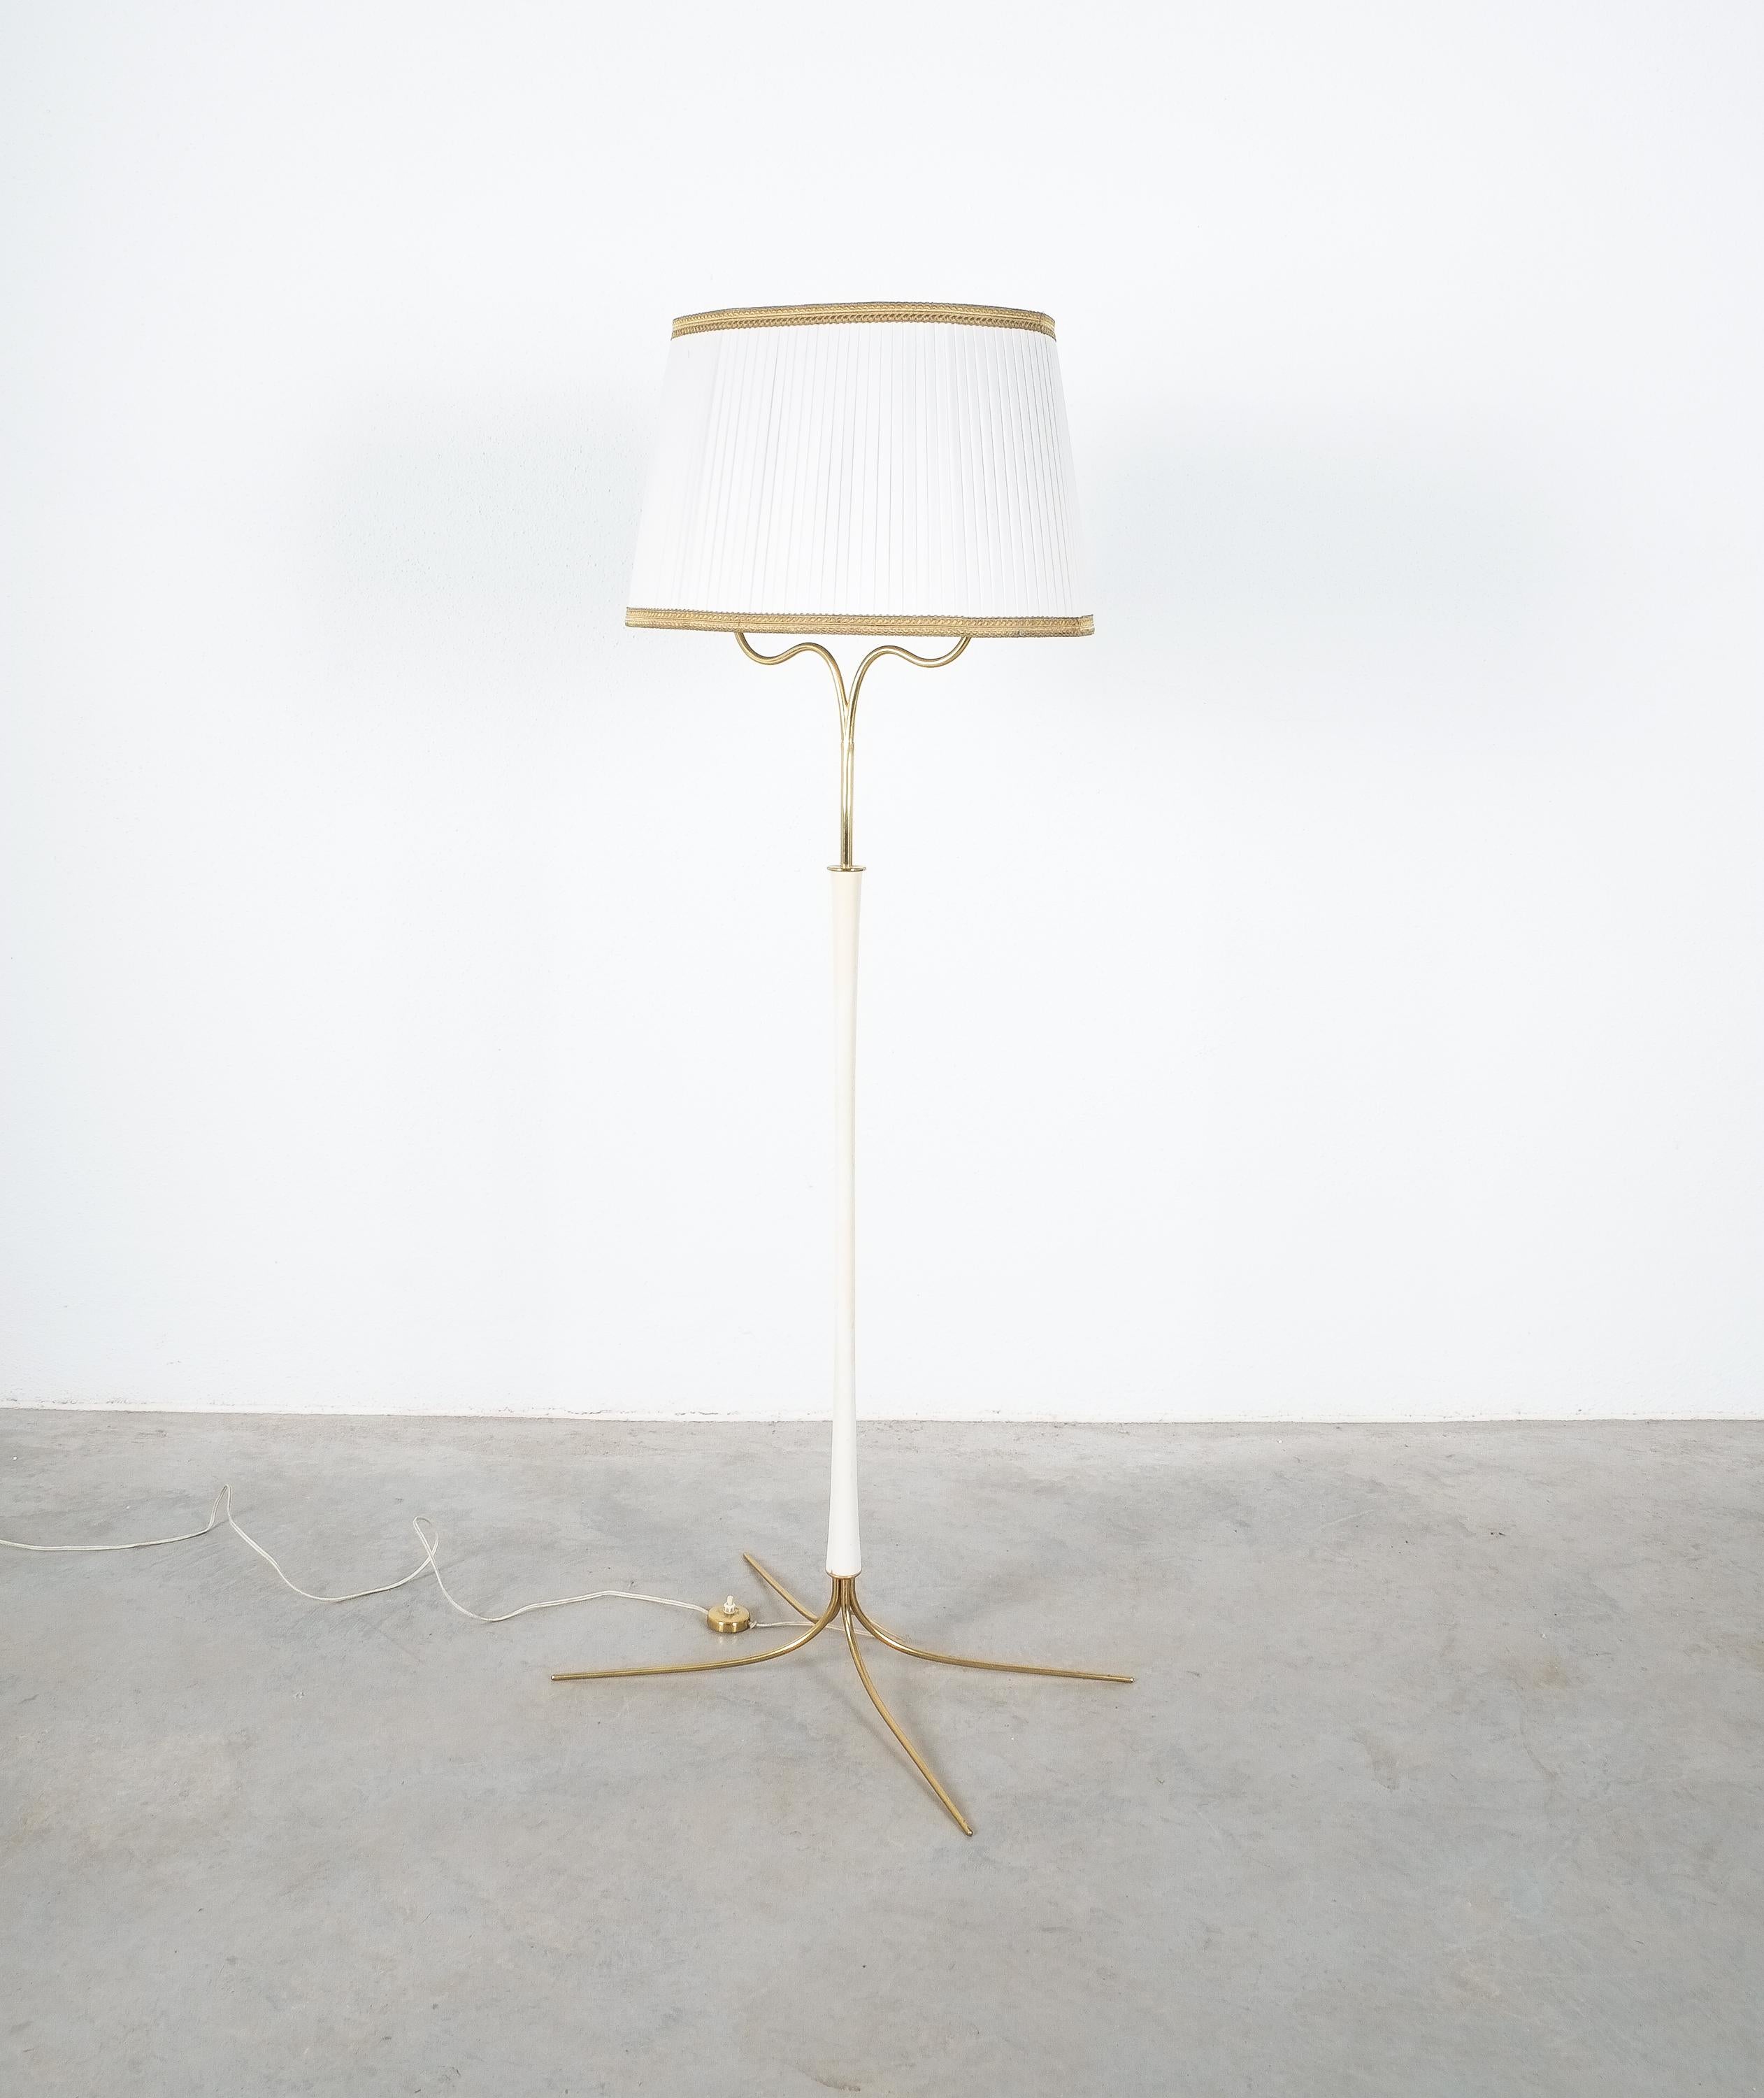 Rare floor light by Vereinigte Werkstaette, circa 1955-1960 

Beautiful floor lamp with a classical shade, delicate brass ware and a wooden handle. It's in good vintage condition with a wide stretched tubular brass foot. It holds 2x e26/27 Edison